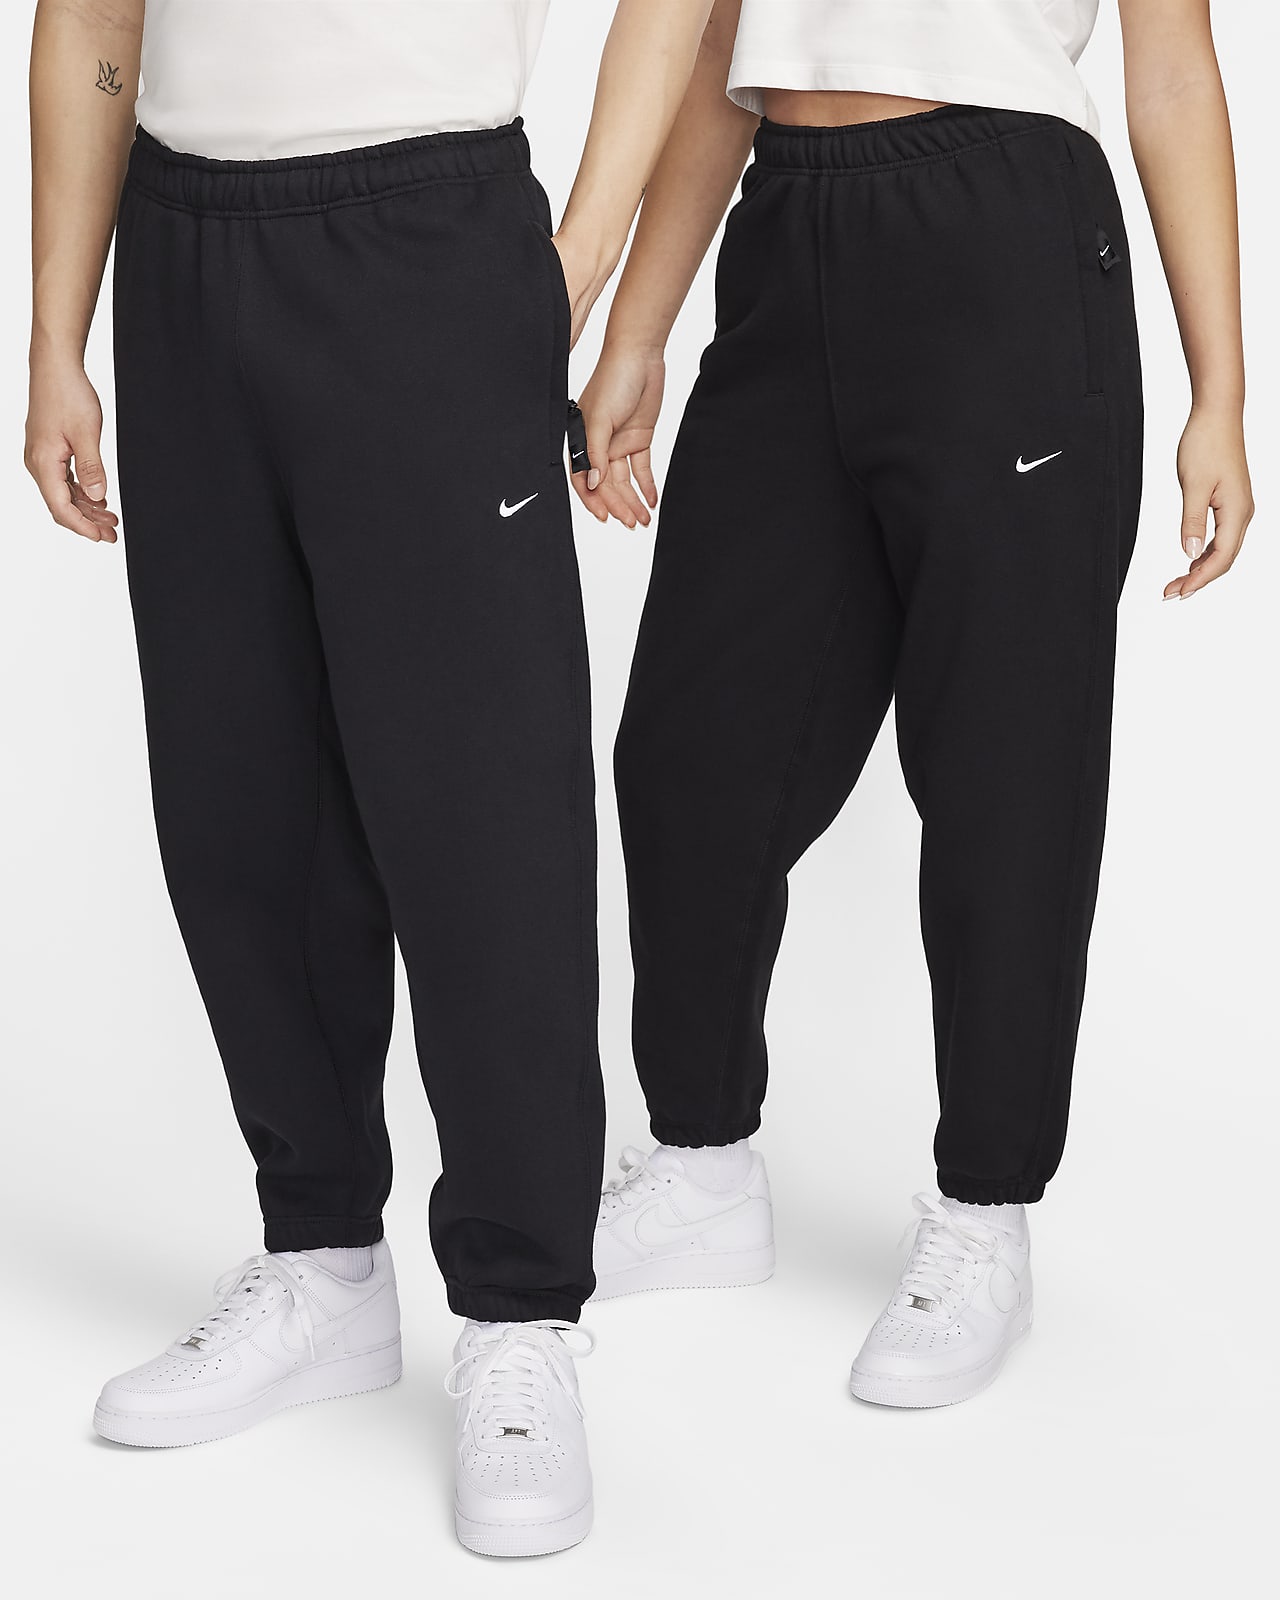 Nike vintage track pants | Track pants outfit, Track pants women, Retro  outfits